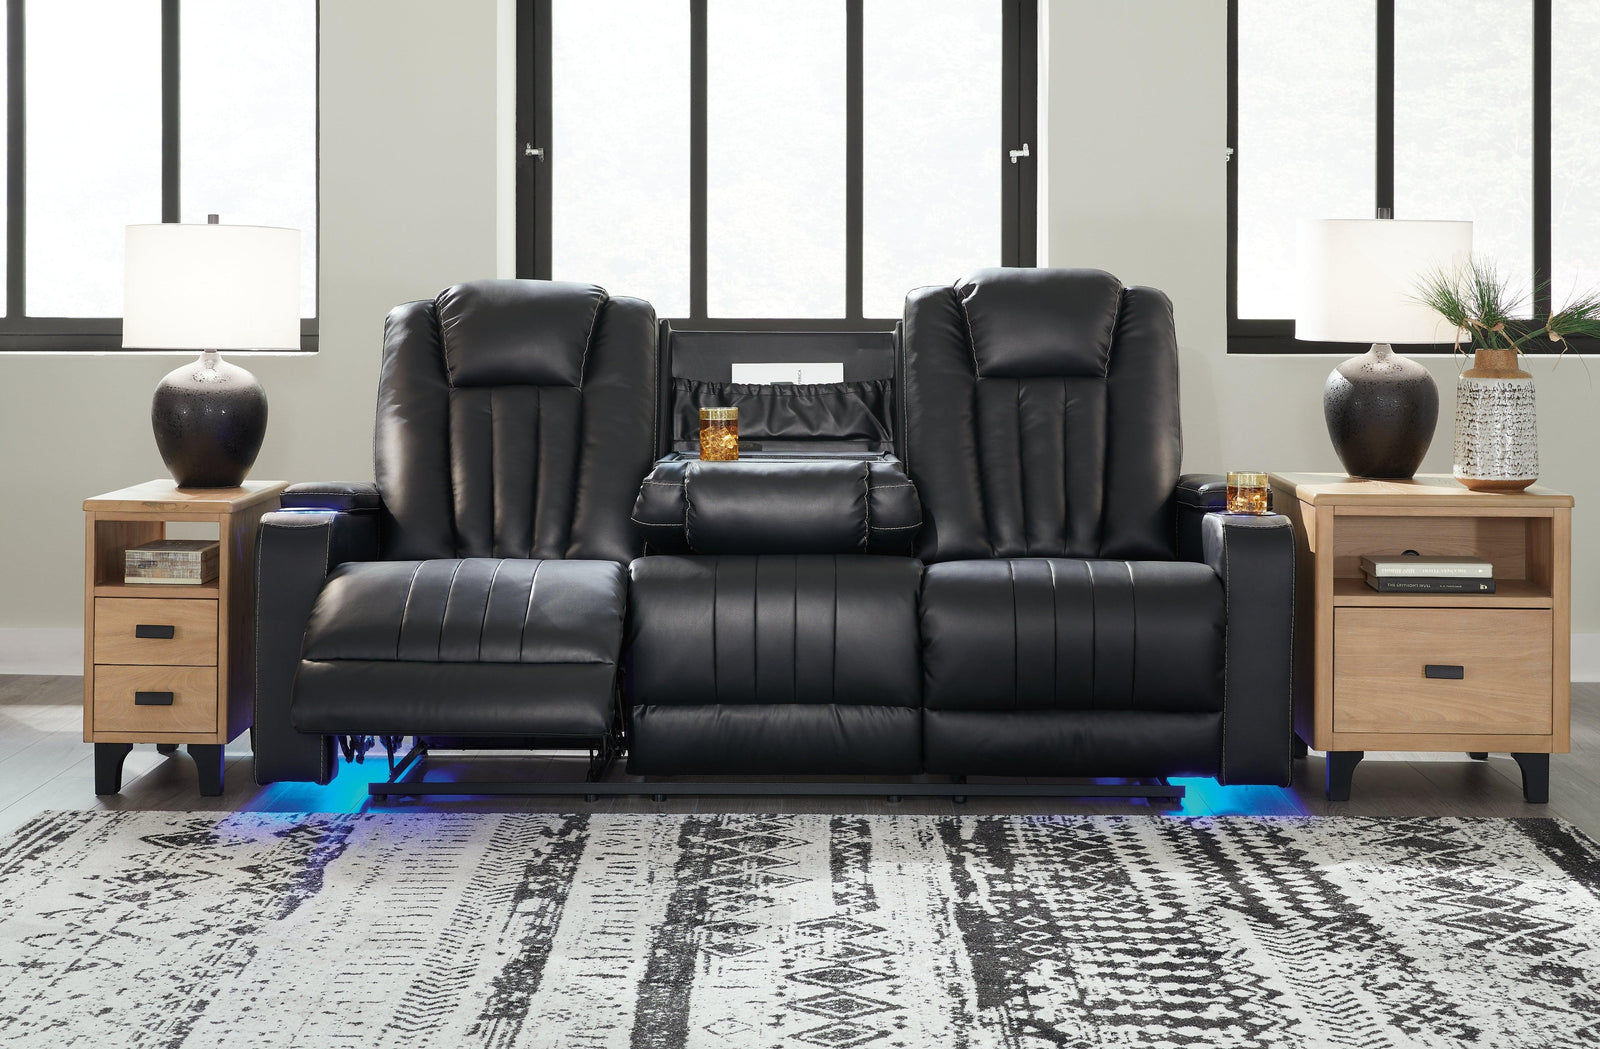 Center Point Black Faux Leather Reclining Sofa With Drop Down Table - Ella Furniture